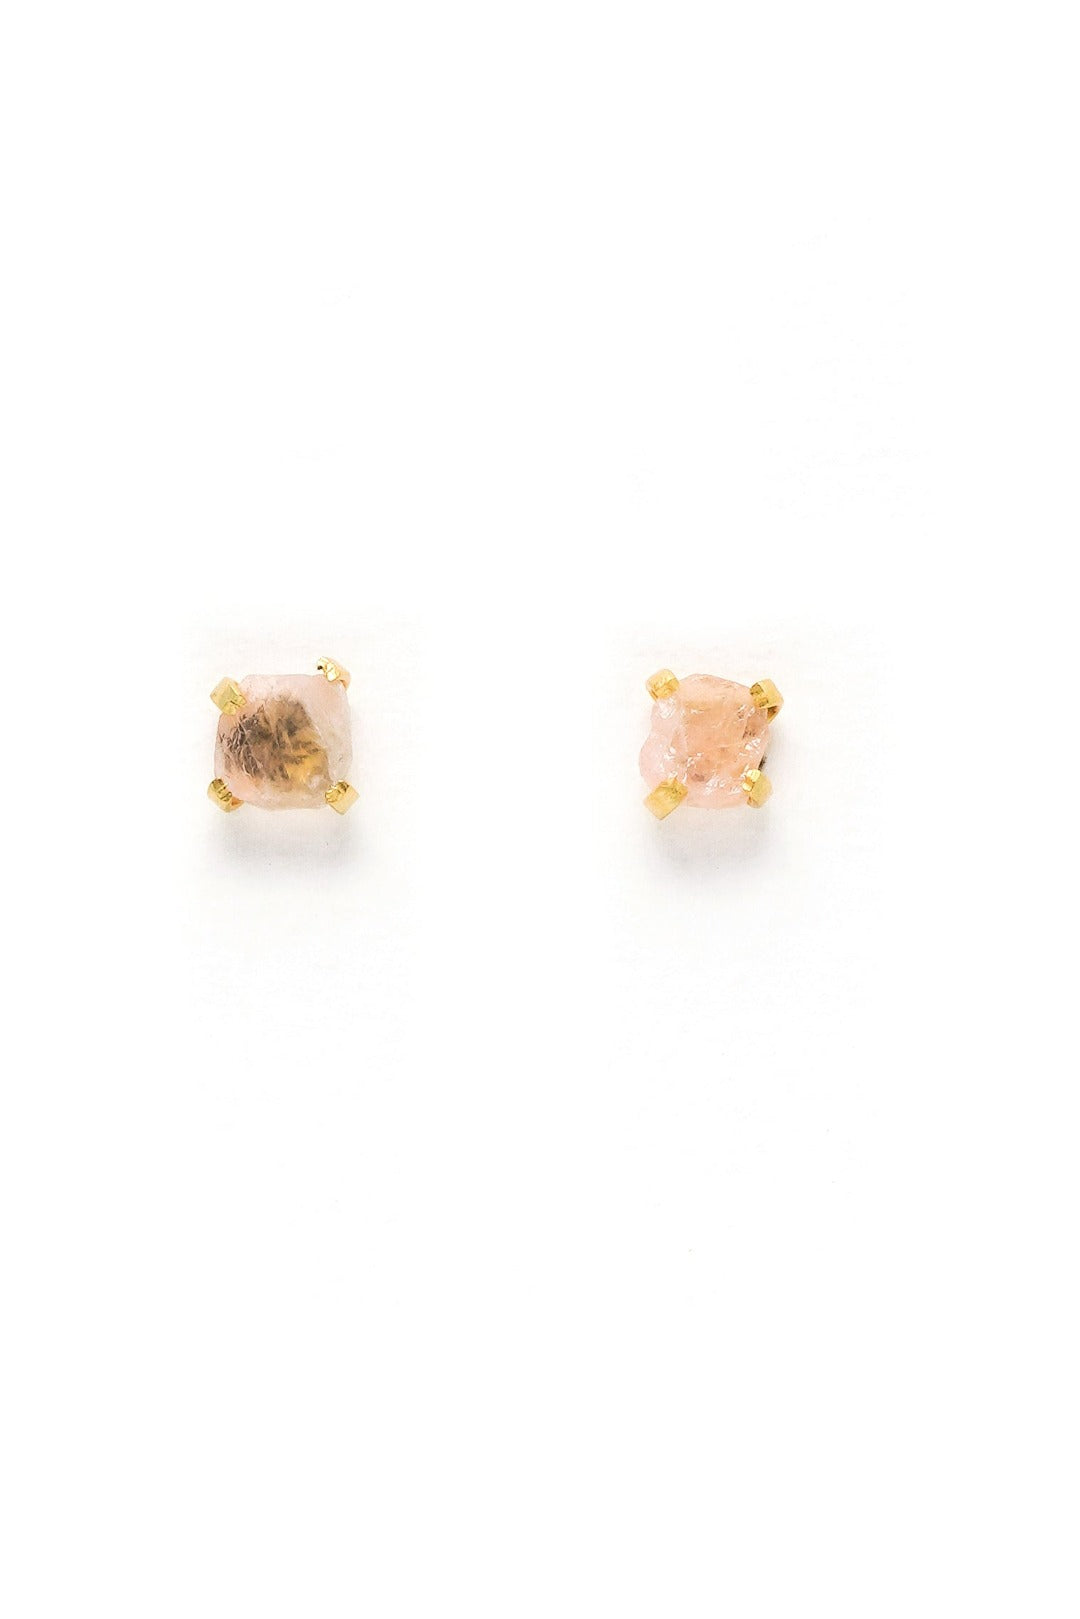 Gold Plated Rough Rose Quartz Small Stud Earrings